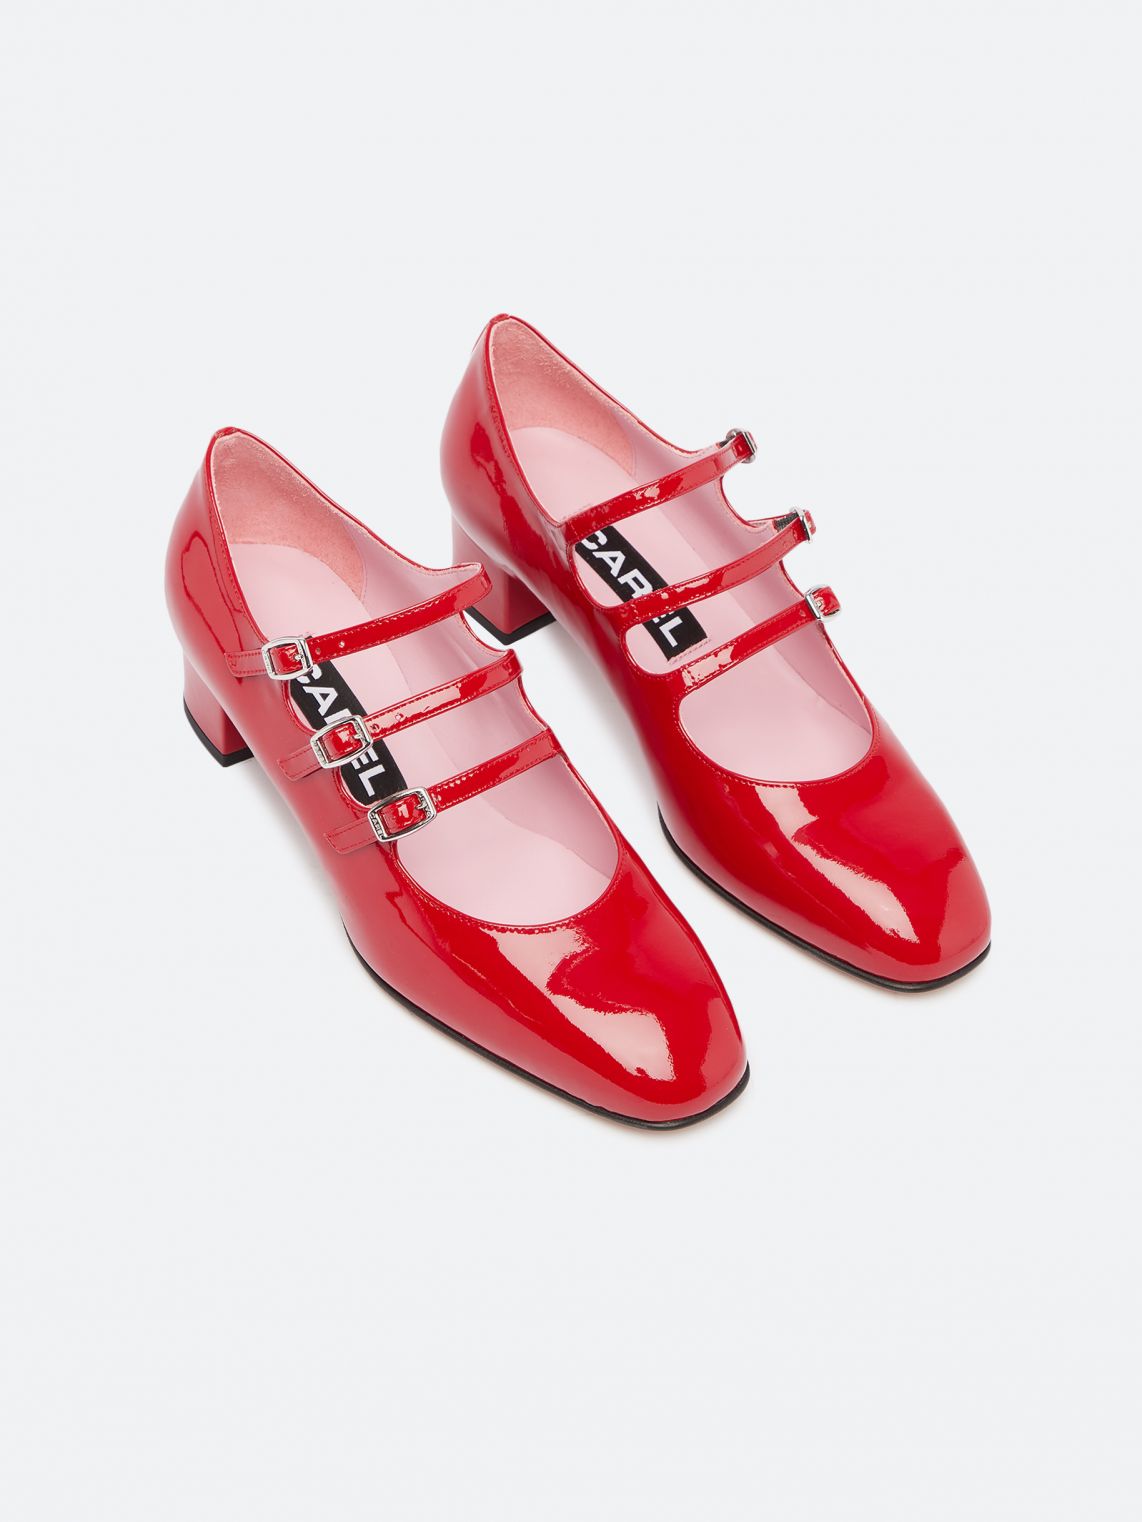 Kina Red Patent Leather Mary Janes Pumps Carel Paris Shoes